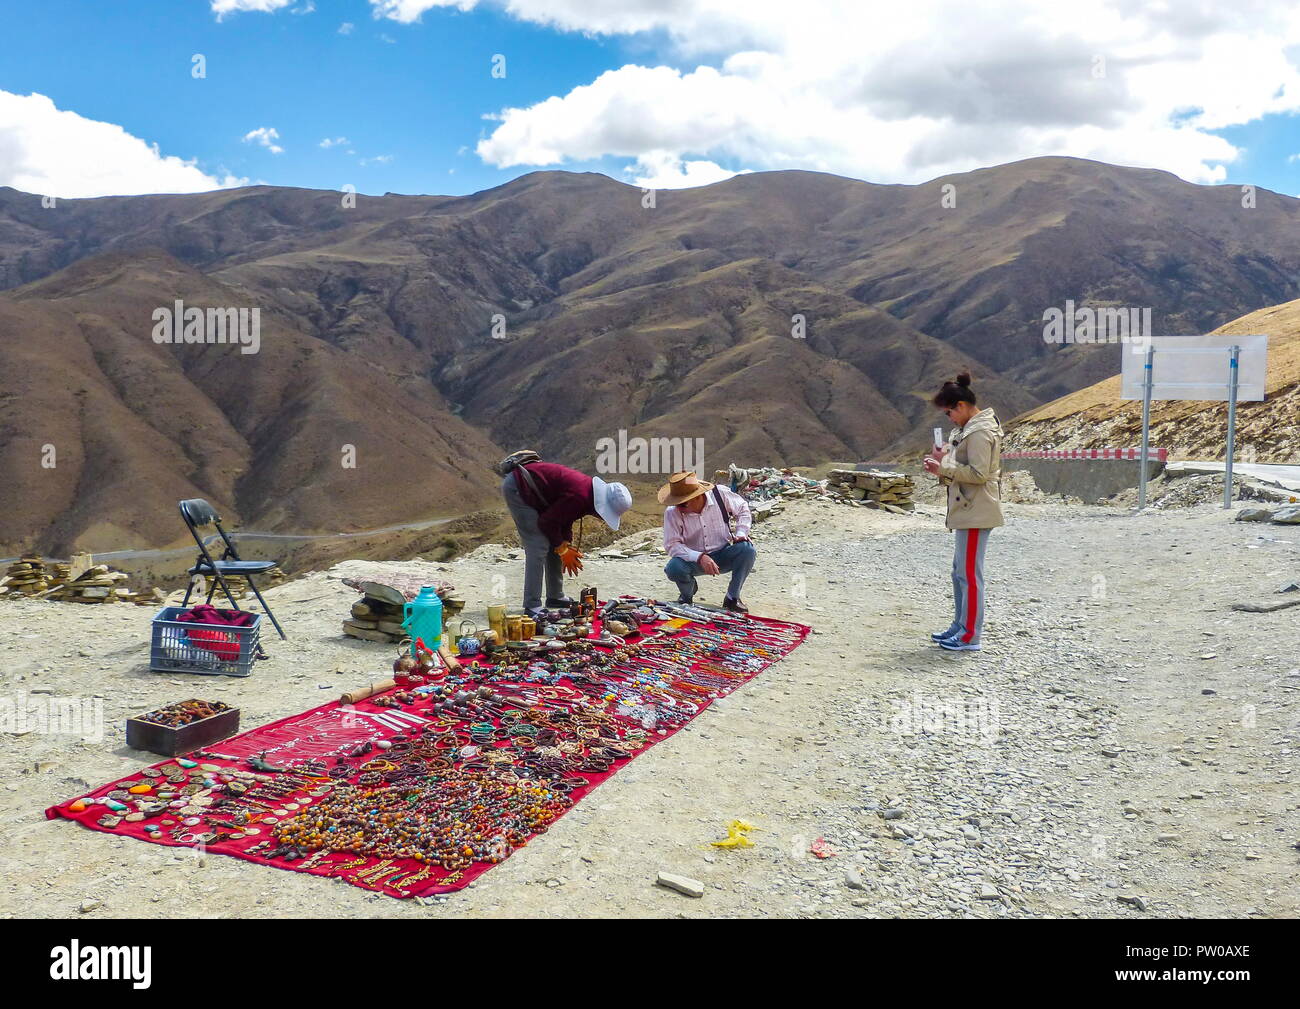 Vendor selling Tibetan stones, beads and souvenirs along the Kampala Pass serving customers on the way to Yamdrok Lake. Stock Photo